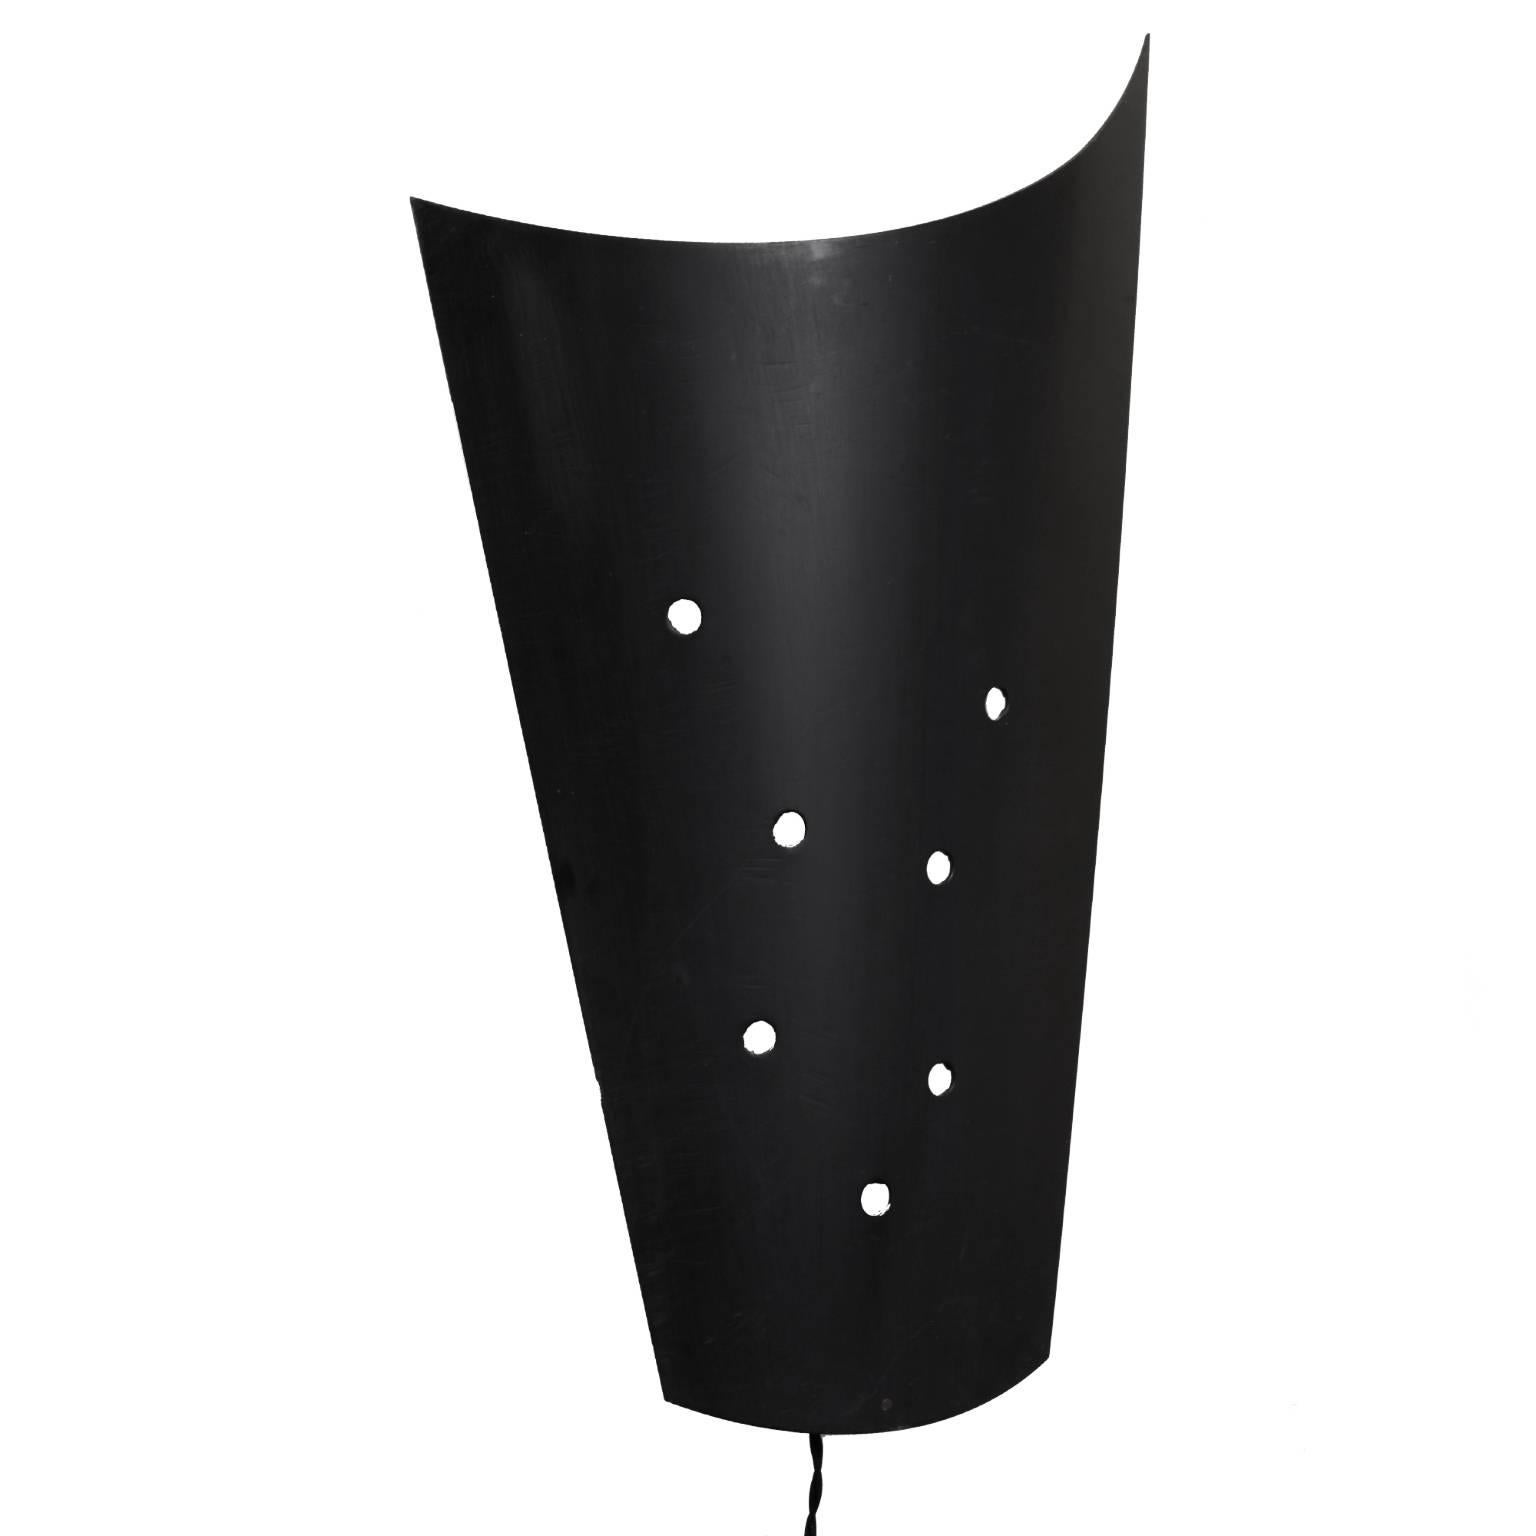 Sourced from a French cinema, this pair of black metal sconces dates to the 1980s. The postmodern design’s perforated holes create a constellation of light. A curved, conical shape directs up-and down-lights while concealing a double socket and